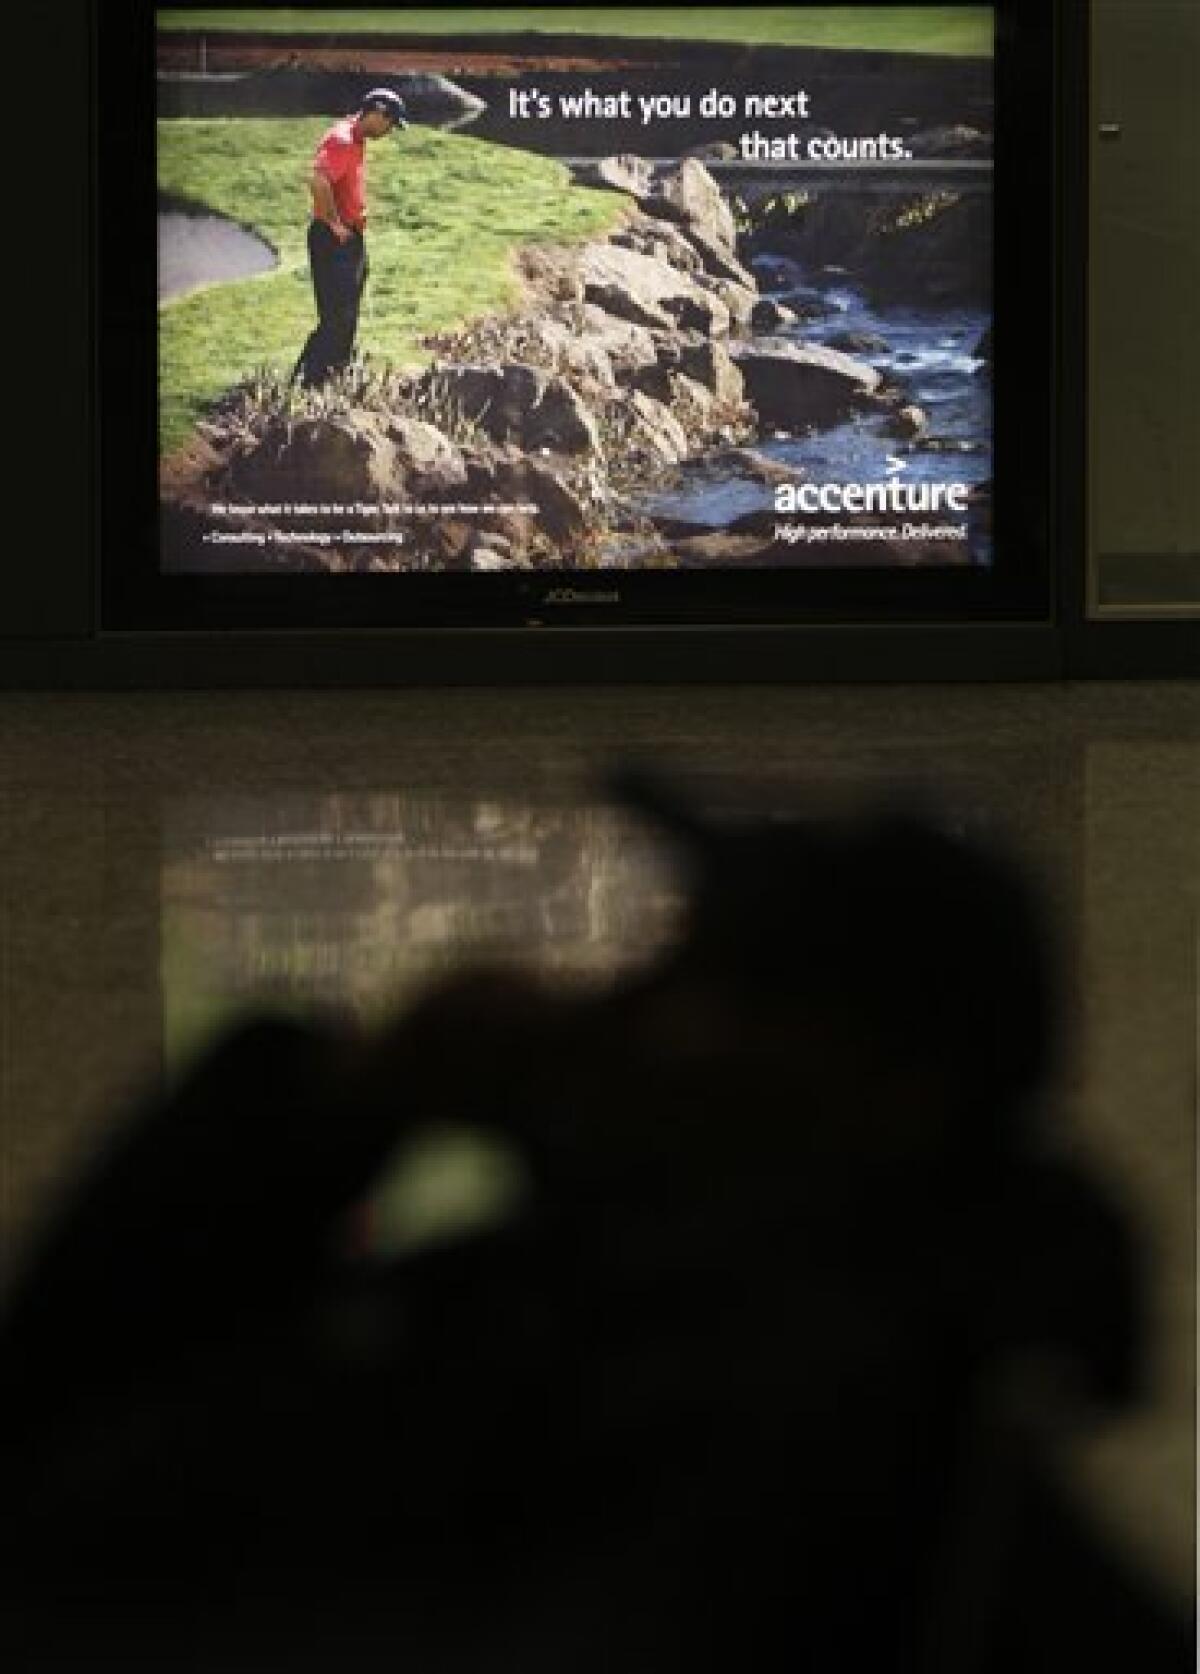 An ad for consulting firm Accenture featuring Tiger Woods is seen at Dulles International Airport in Chantilly, Va. Monday, Dec. 14, 2009. Accenture, which pinned its entire identity on the golfer, severed its ties with Woods on Sunday, days after he announced an indefinite leave from golf to work on his marriage after allegations of infidelity surfaced in recent weeks. (AP Photo/Luis M. Alvarez)